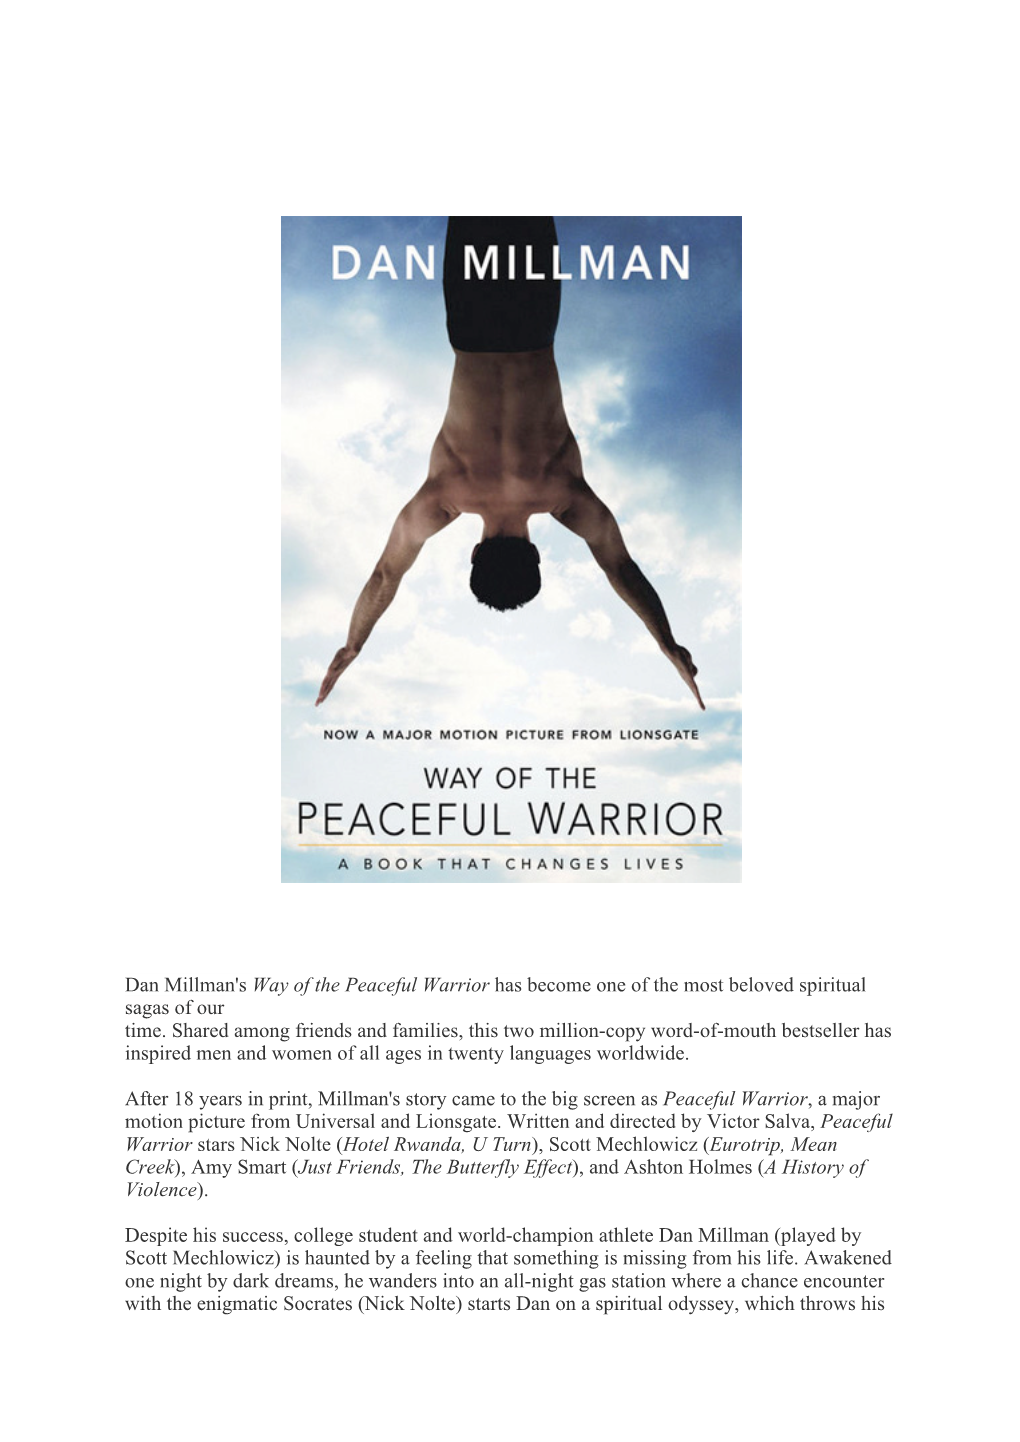 Dan Millman's Way of the Peaceful Warrior Has Become One of the Most Beloved Spiritual Sagas of Our Time